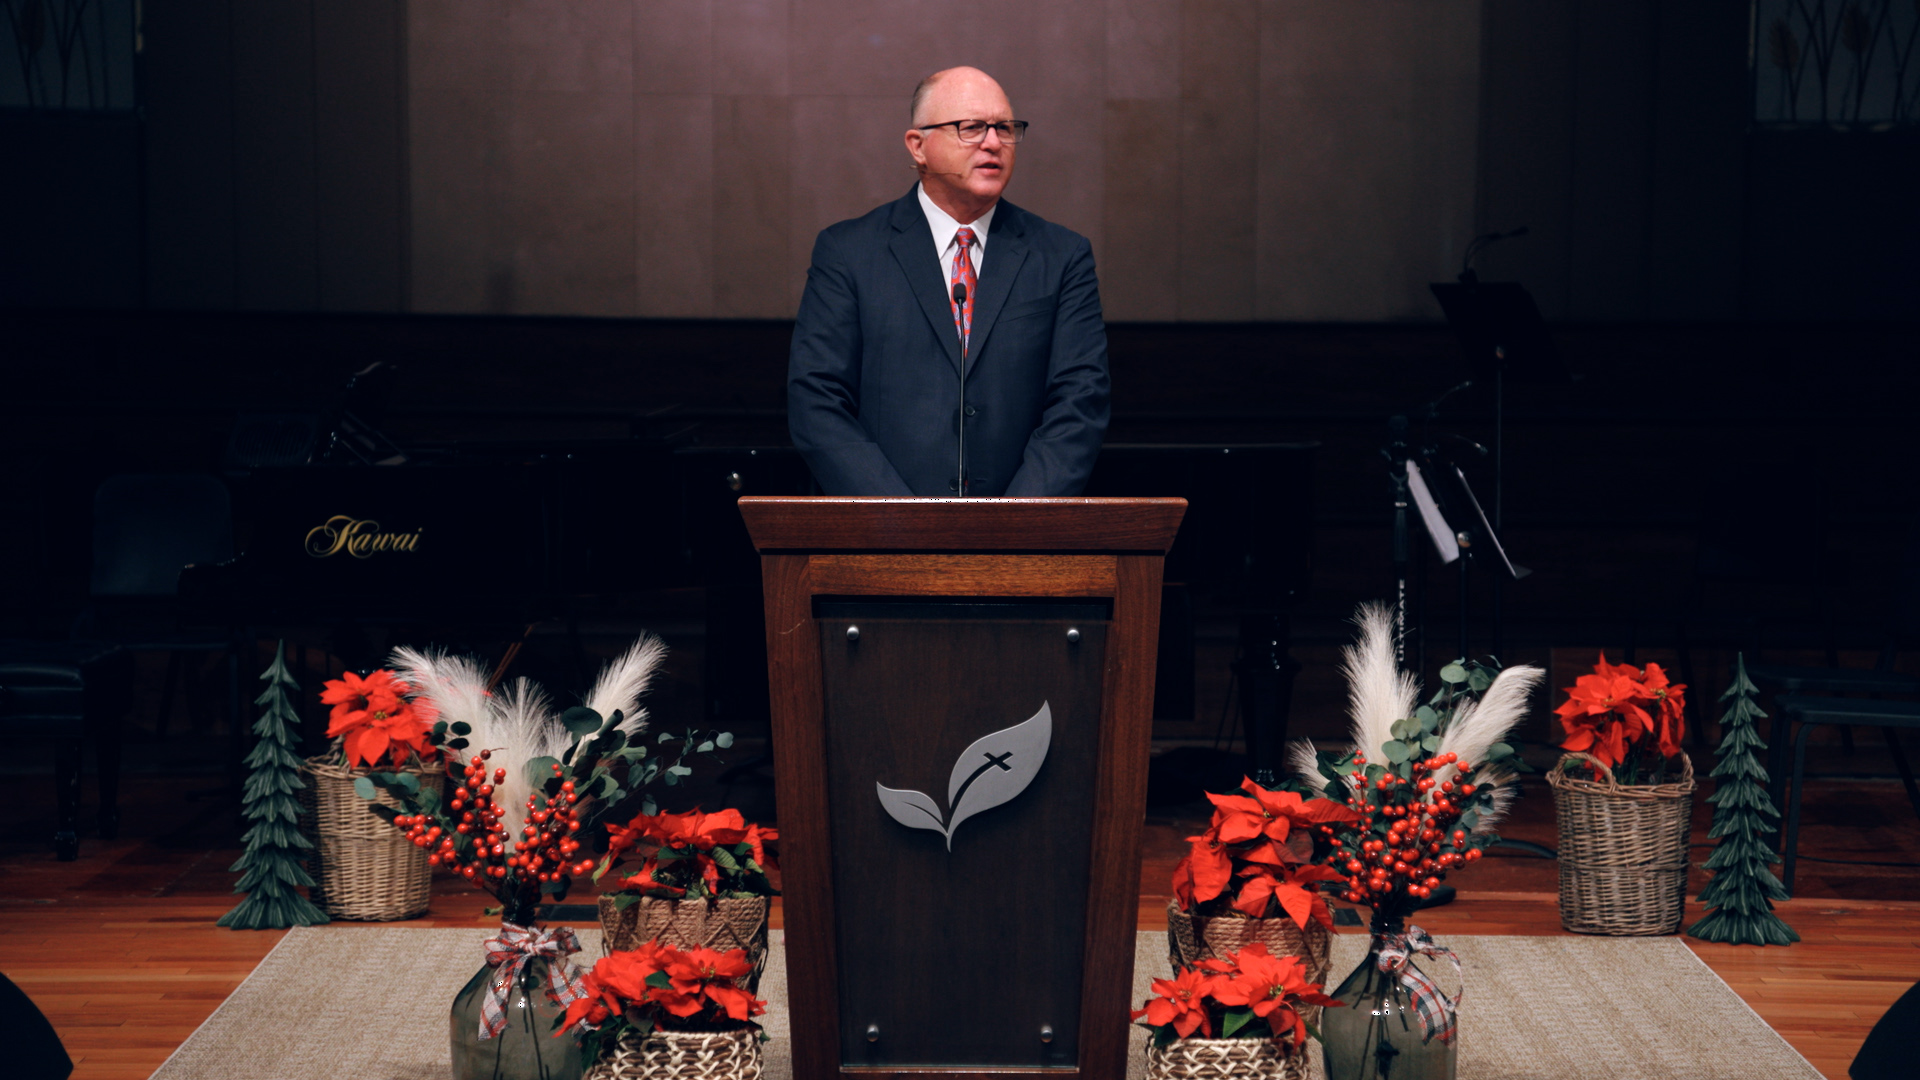 Pastor Paul Chappell: A Wonderful Journey to Jesus